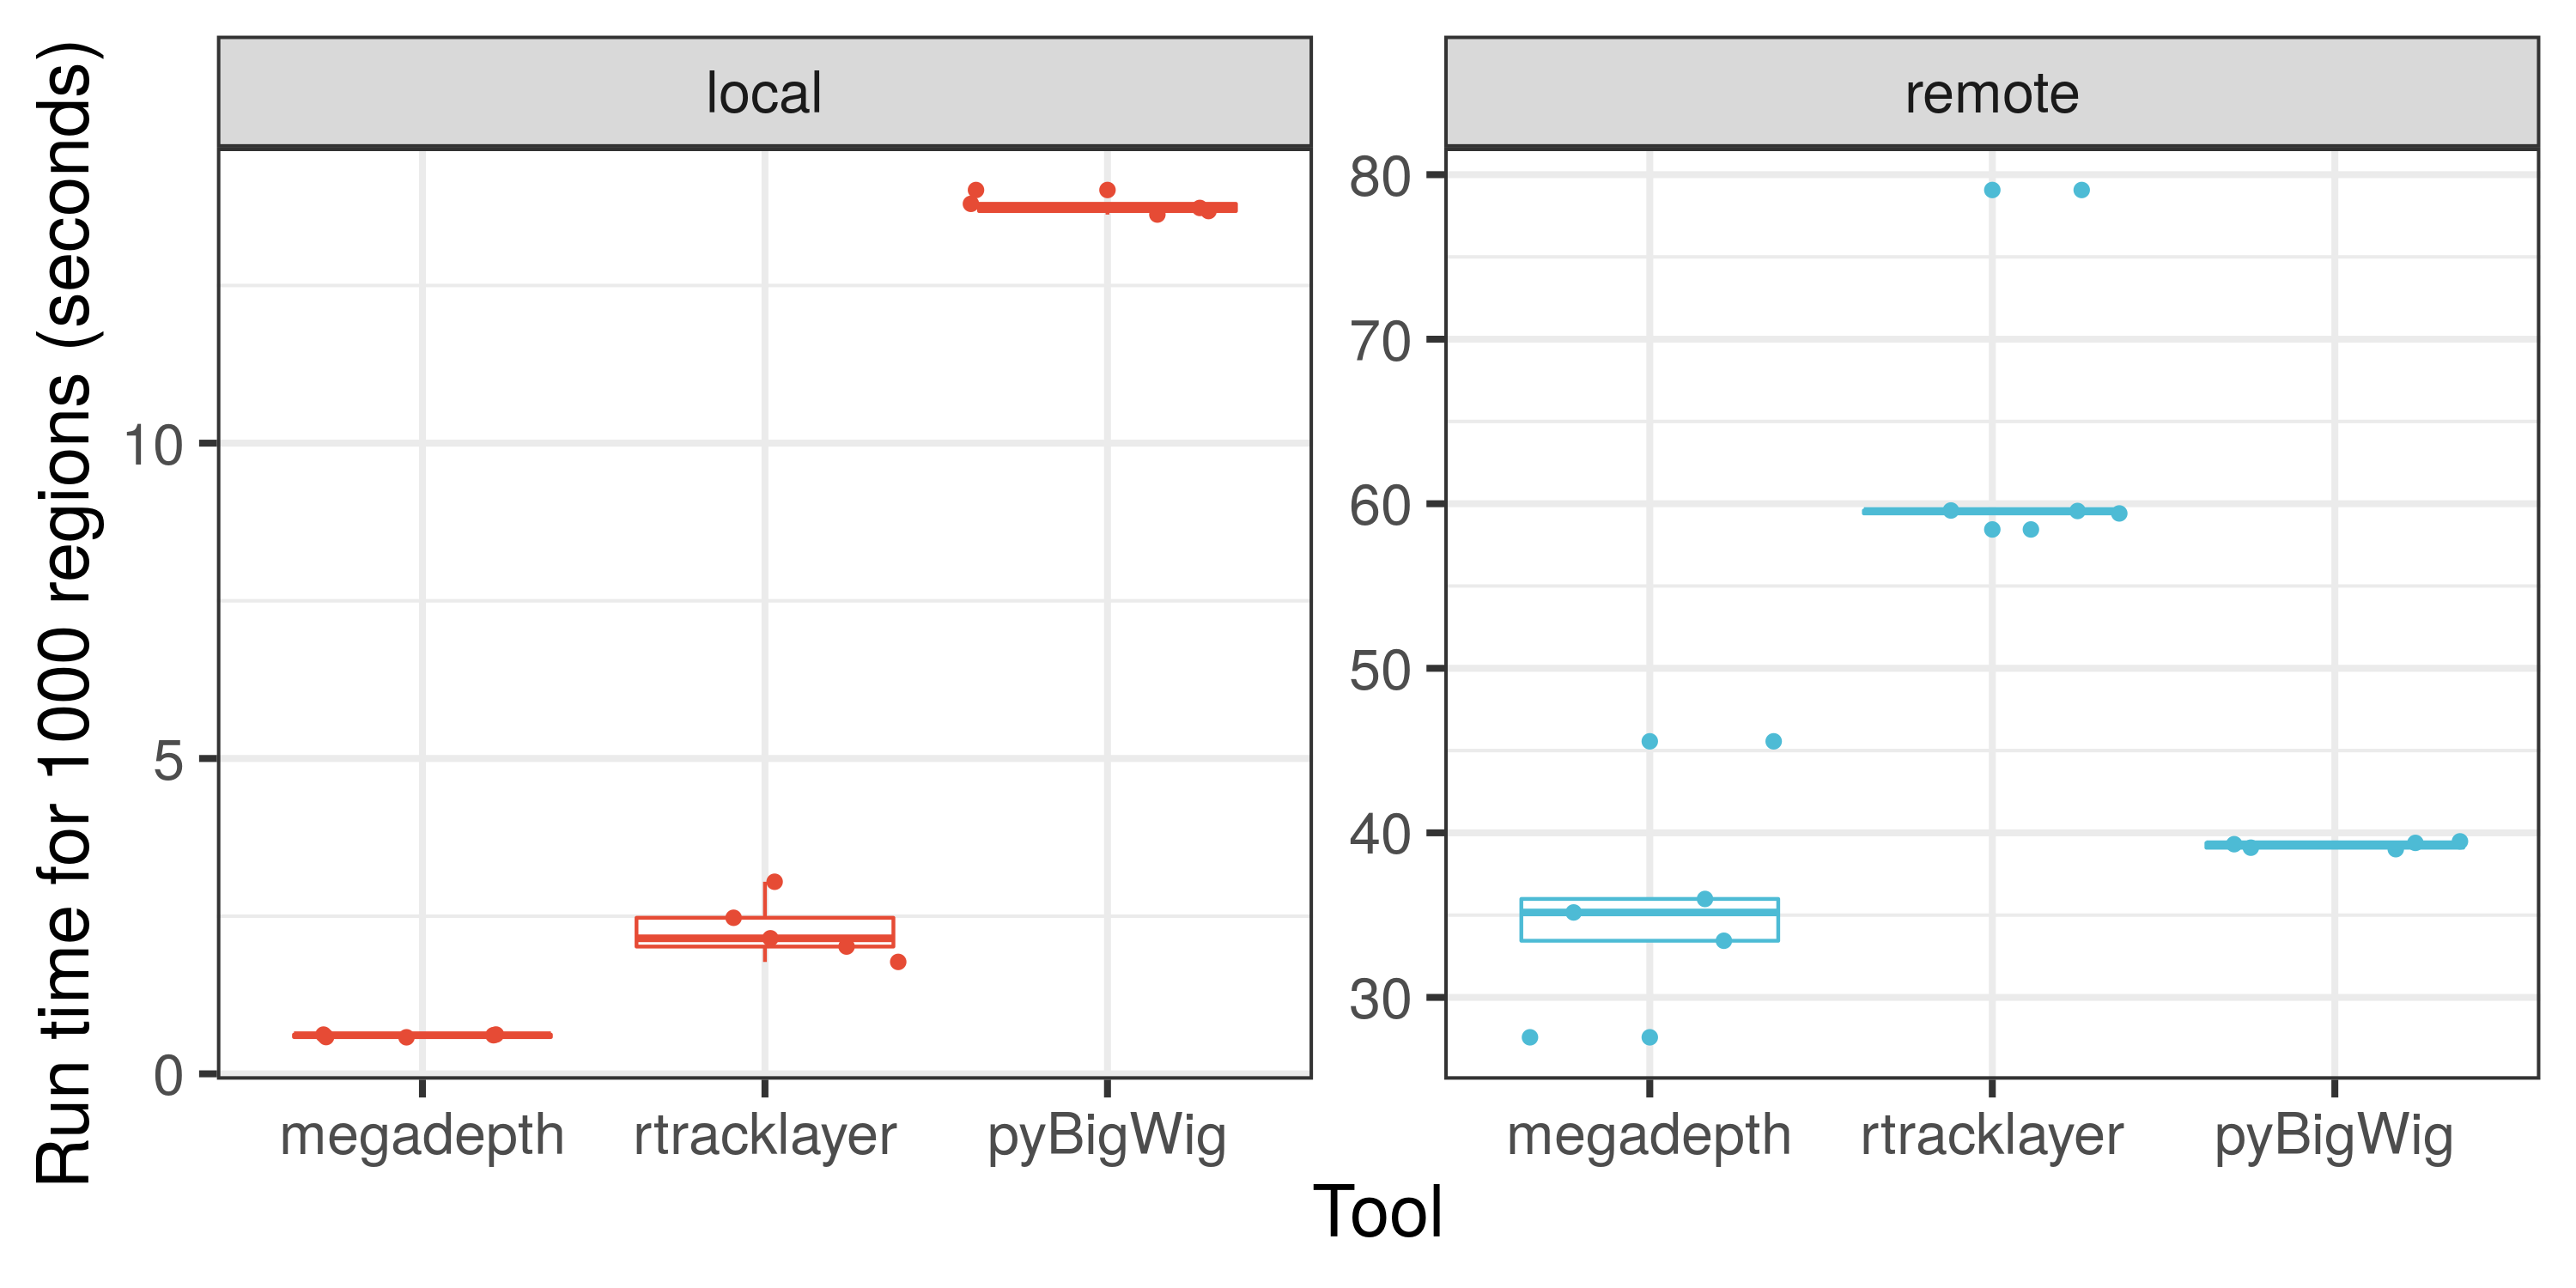 Timing results. Timing comparison for processing 1,000 genomic regions on a bigWig file that is available on the local disk or on a remote resource. We compared megadepth against rtracklayer and pyBigWig. megadepth is typically faster that these other software solutions for computing the mean coverage across a set of 1,000 input genomic regions. Check <https://github.com/LieberInstitute/megadepth/tree/devel/analysis> for more details.